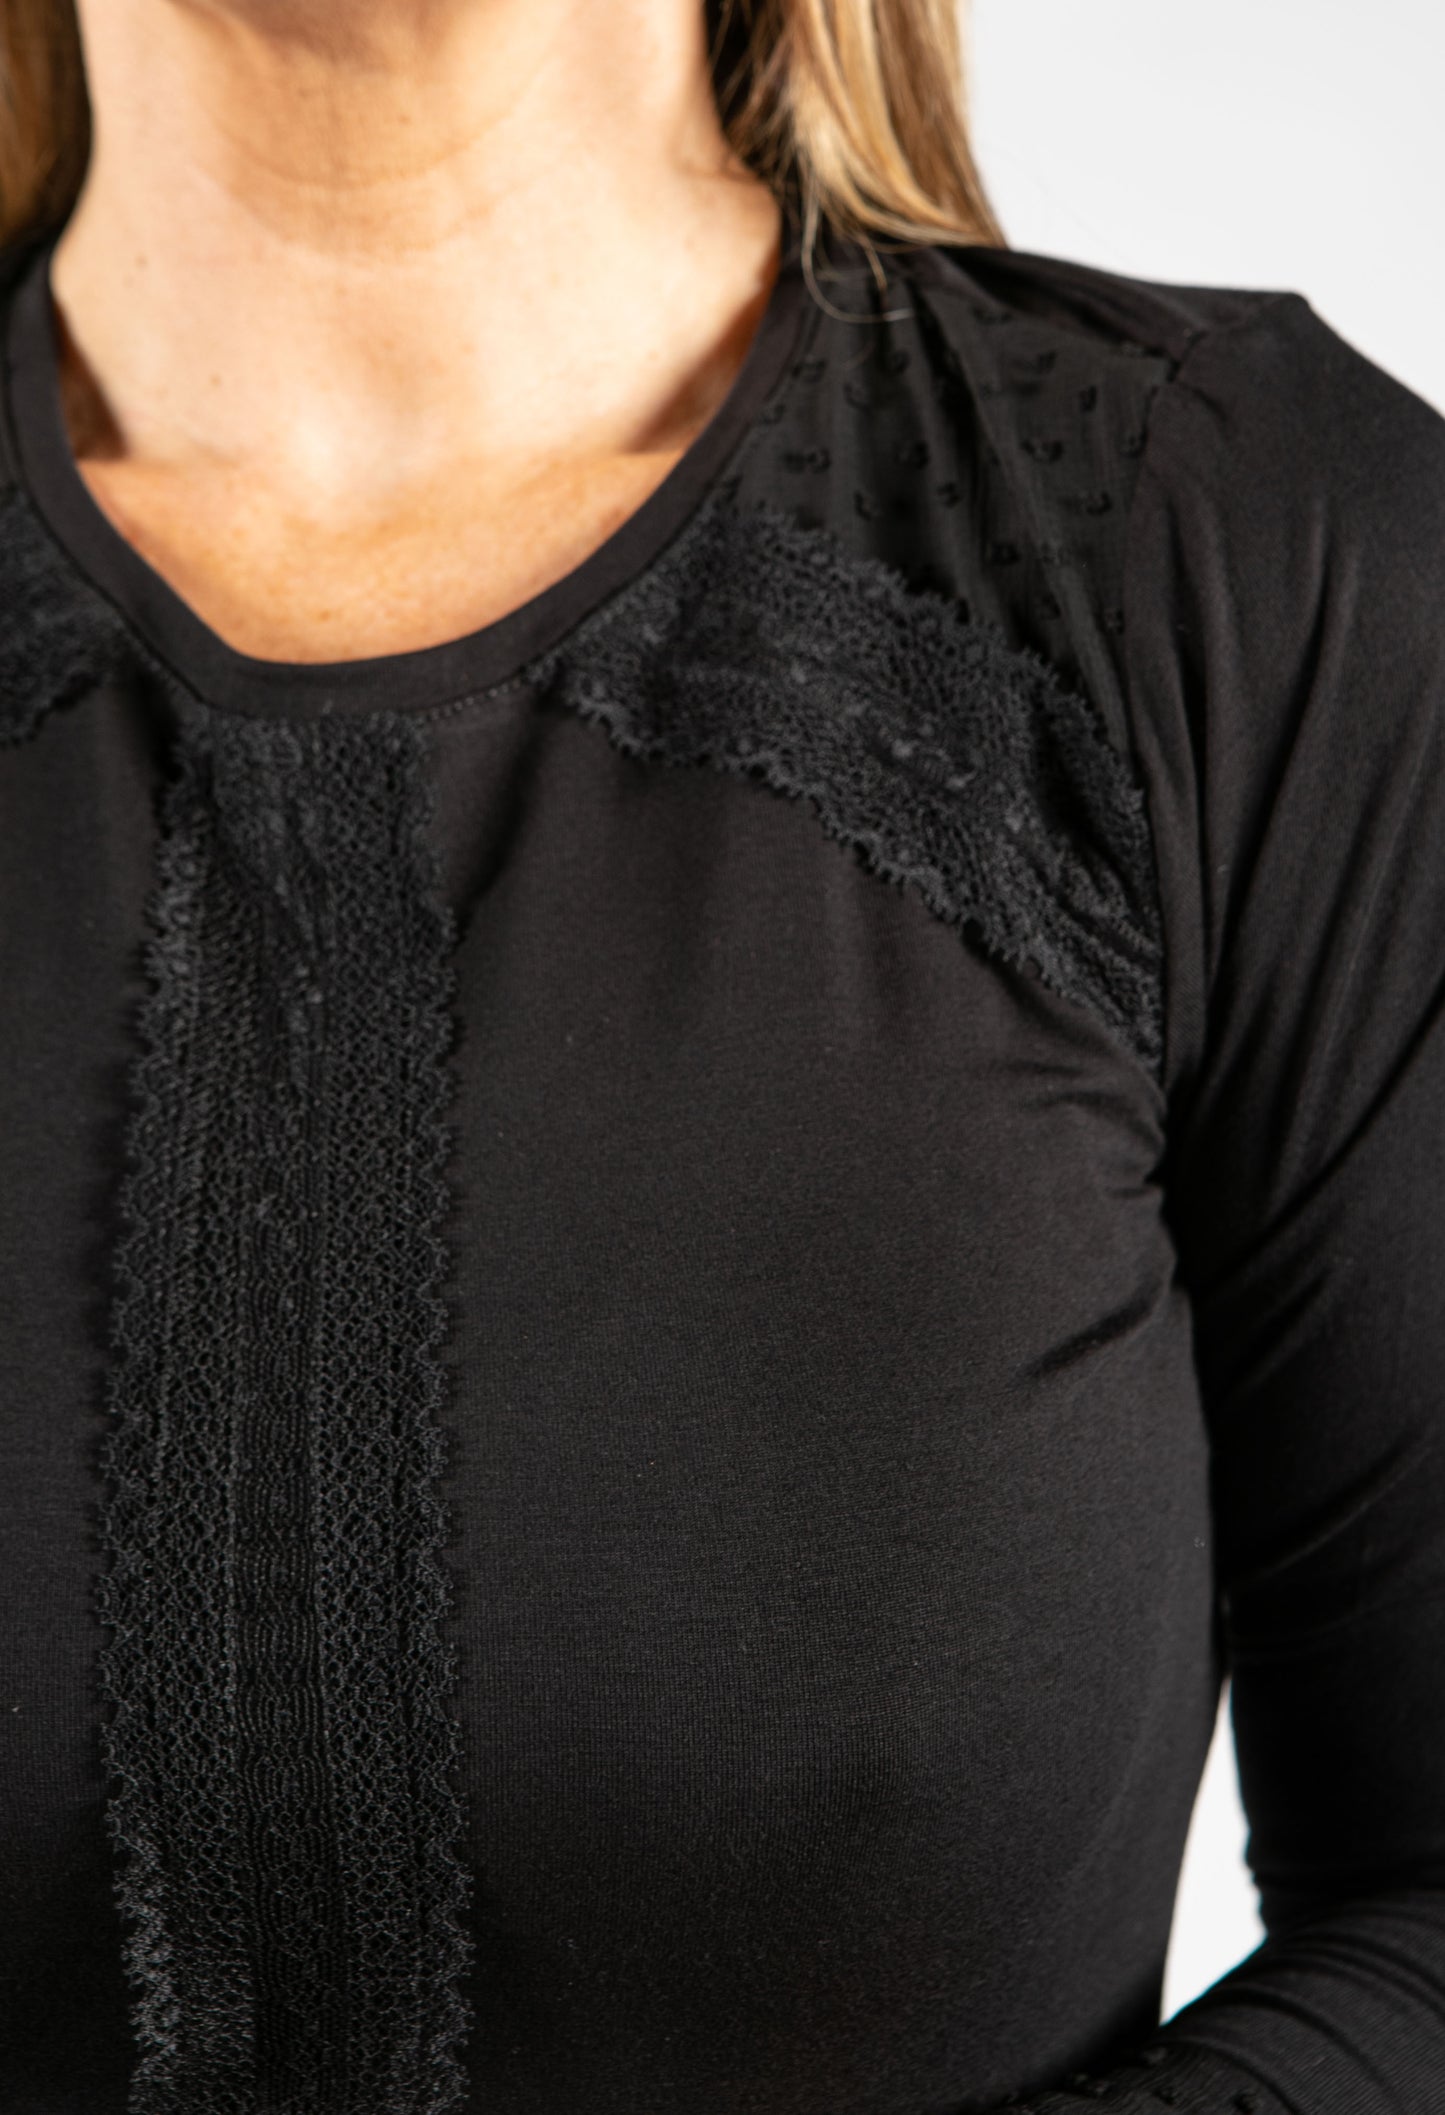 Lace Detail Long Sleeve Top